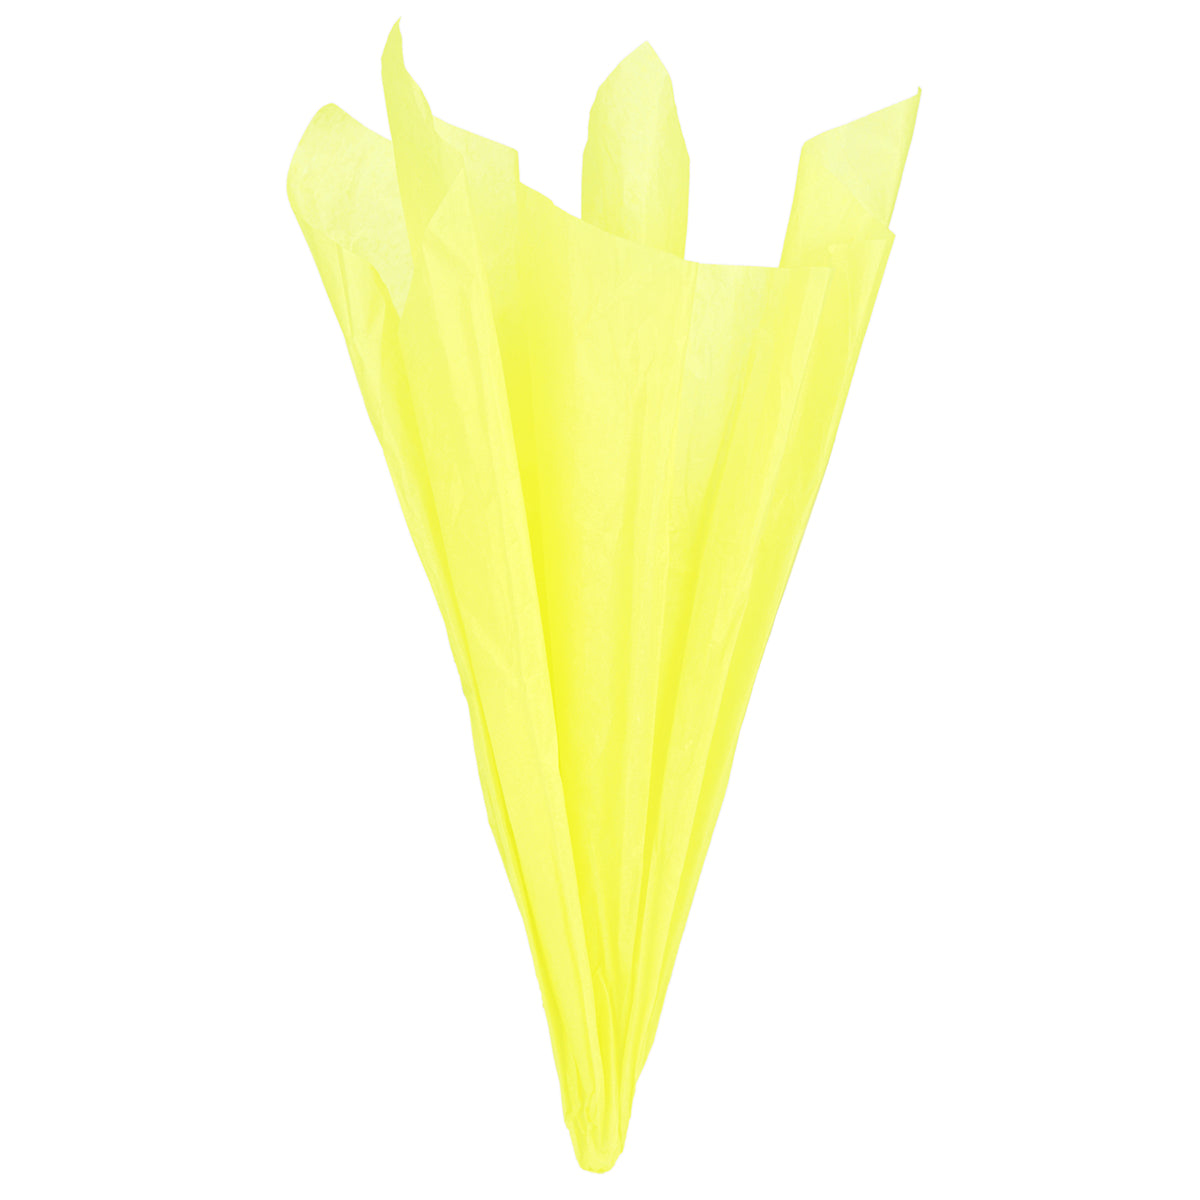 Displaying of a lemon yellow tissue paper in ice cream cone shape